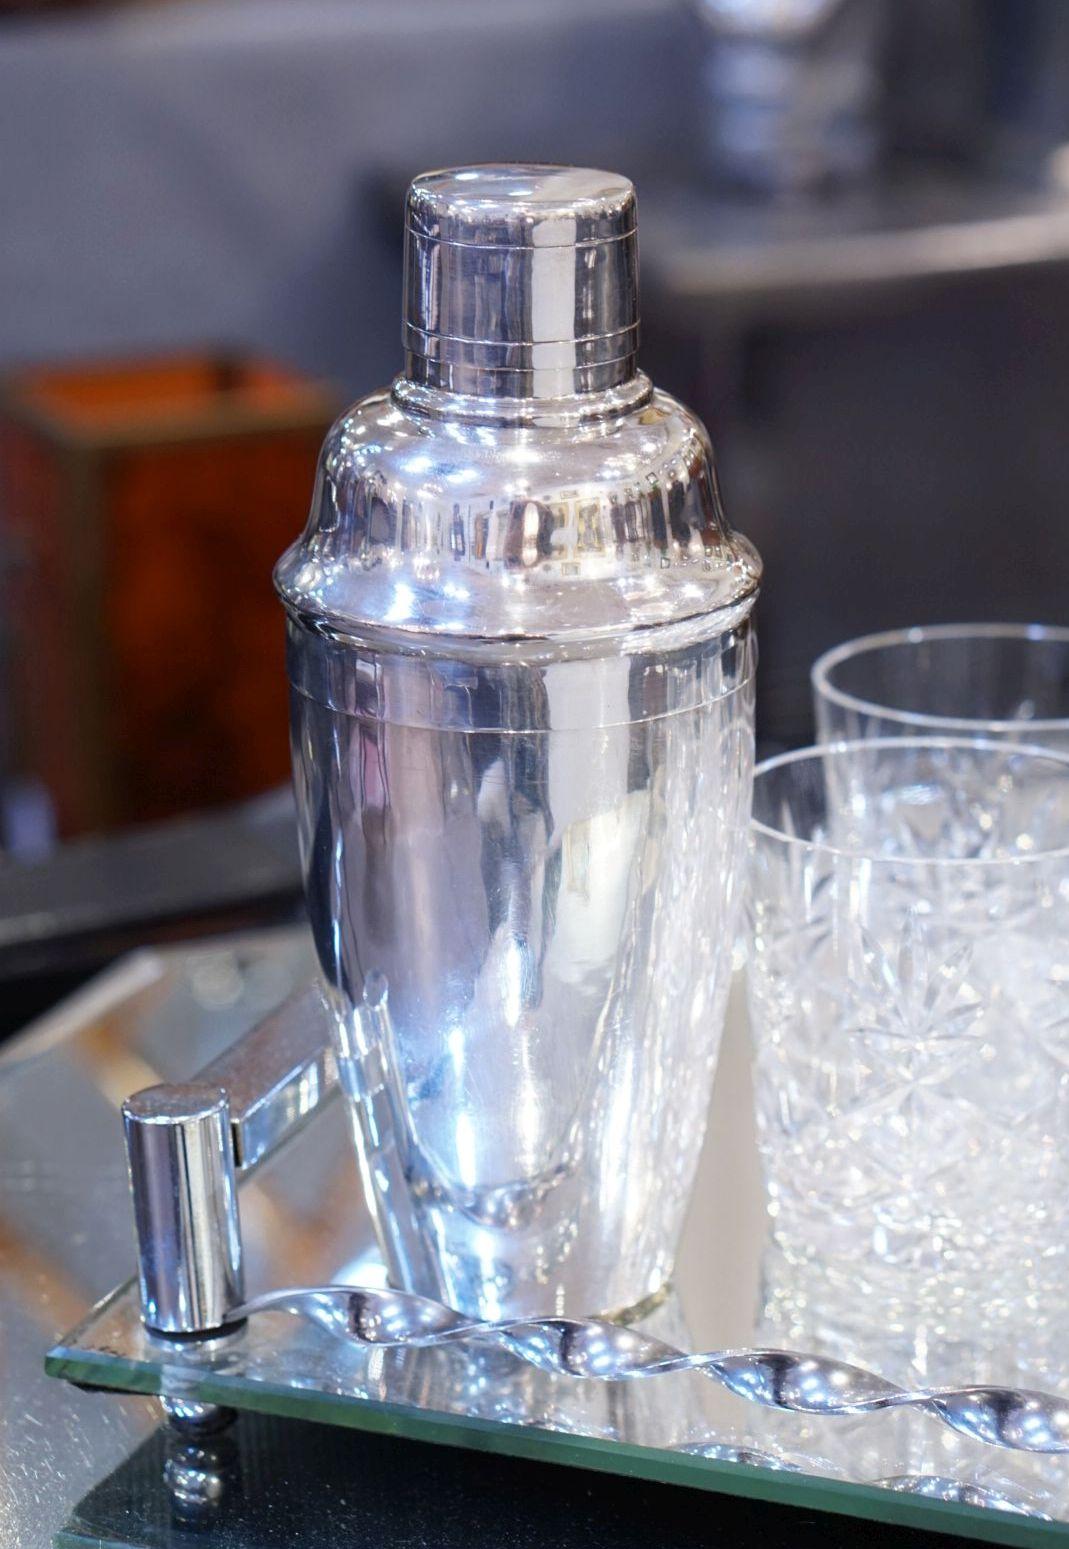 A vintage English cylindrical martini or cocktail shaker of fine plate silver featuring a stylish Art Deco design, with removable cap and strainer.

Impressed mark to base: Van Buren

Perfect for the bar. Even better for martinis.